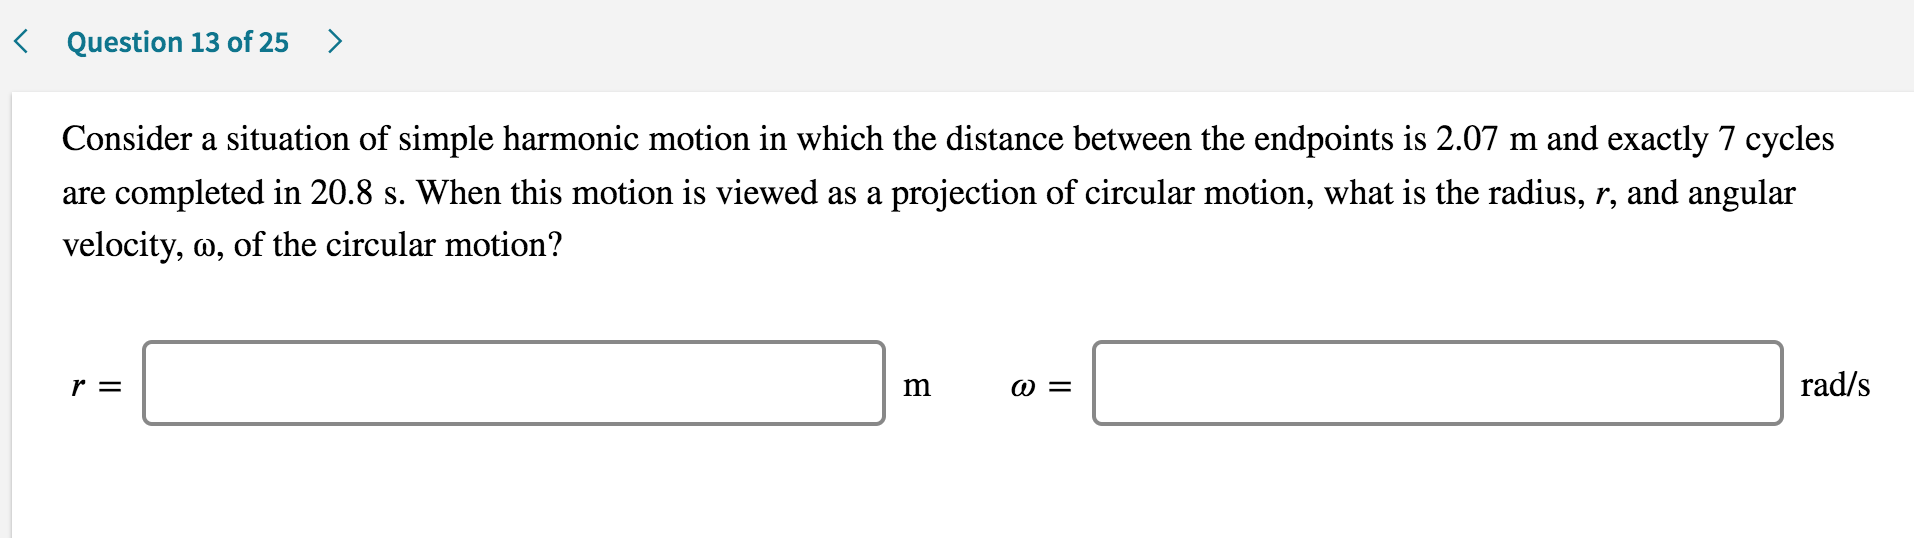 Consider a situation of simple harmonic motion in which the distance between the endpoints is 2.07 m and exactly 7 cycles
are completed in 20.8 s. When this motion is viewed as a projection of circular motion, what is the radius, r, and angular
velocity, m, of the circular motion?
r =
m
@ =
rad/s
